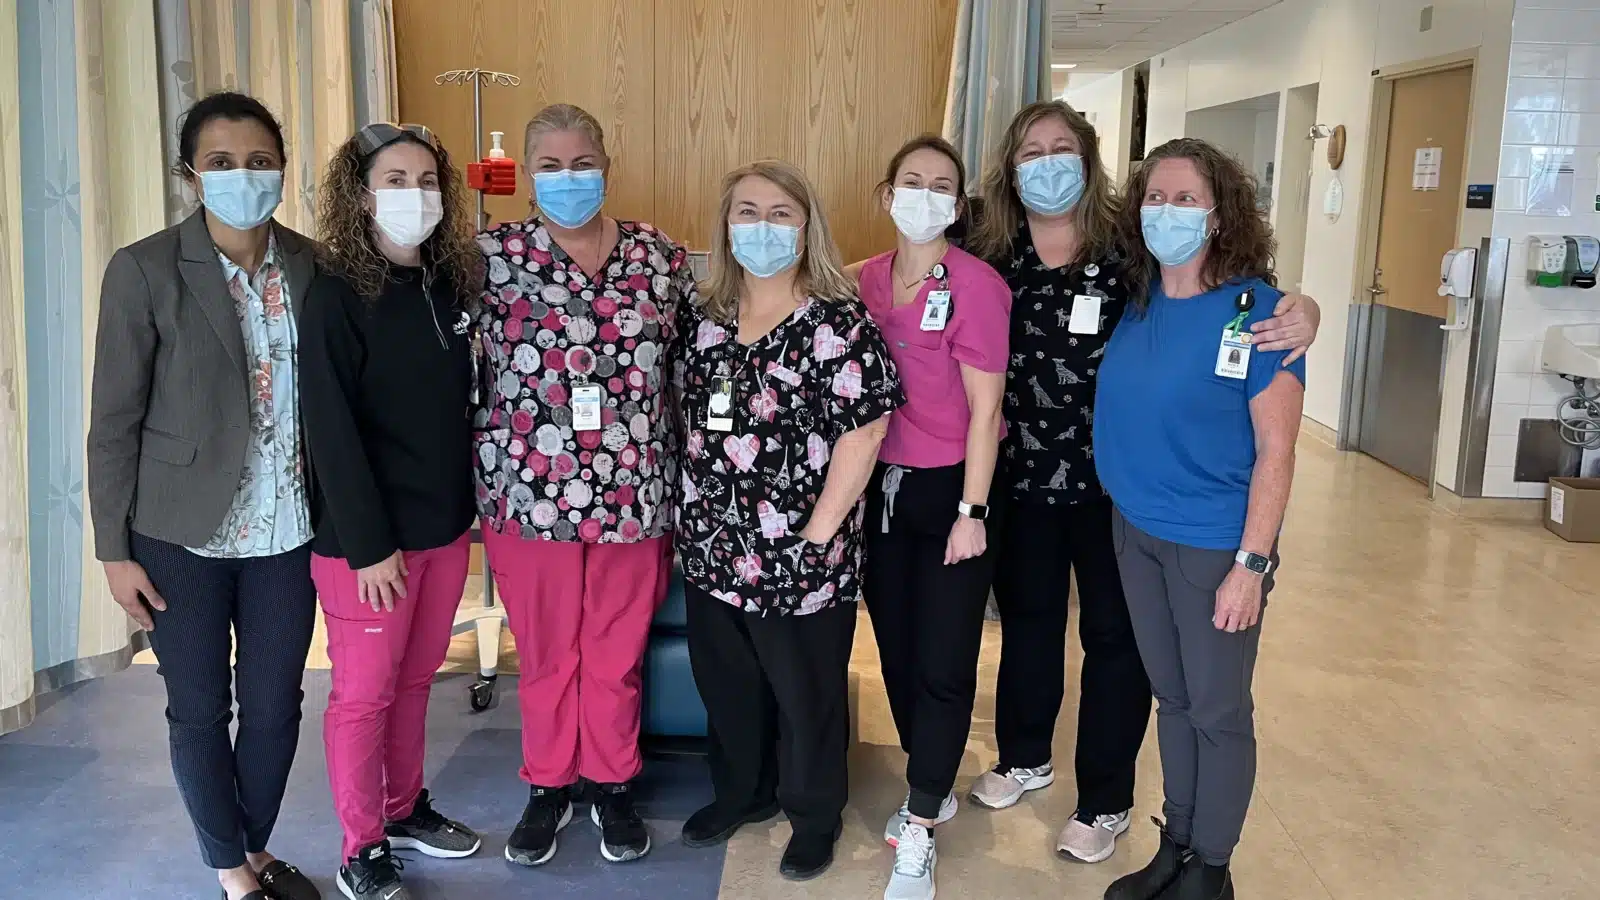 Jolene Bell a nurse at the Simcoe Muskoka Regional Cancer Centre, poses with her colleagues in the cancer centre for a photo